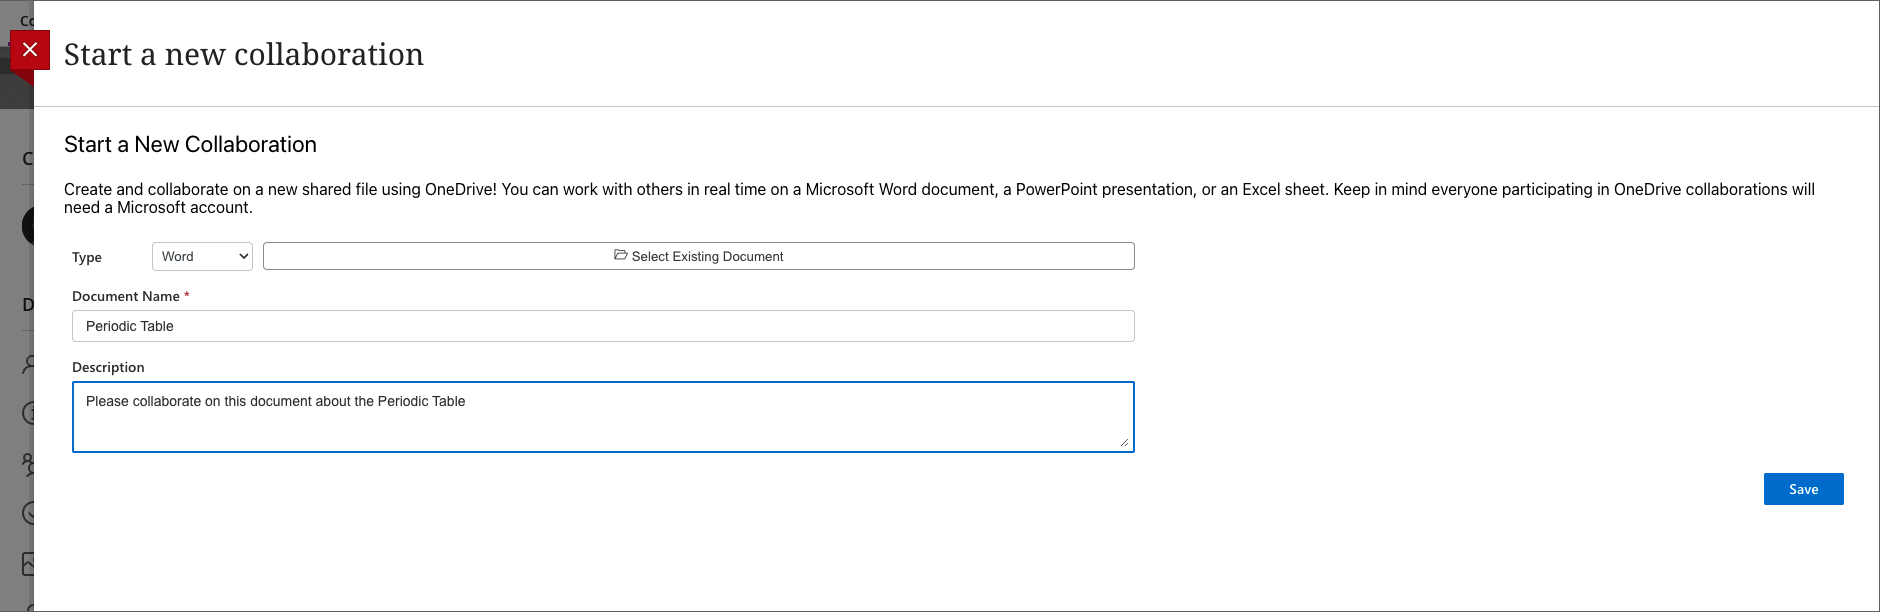 Start a new collaborative document with Microsoft OneDrive